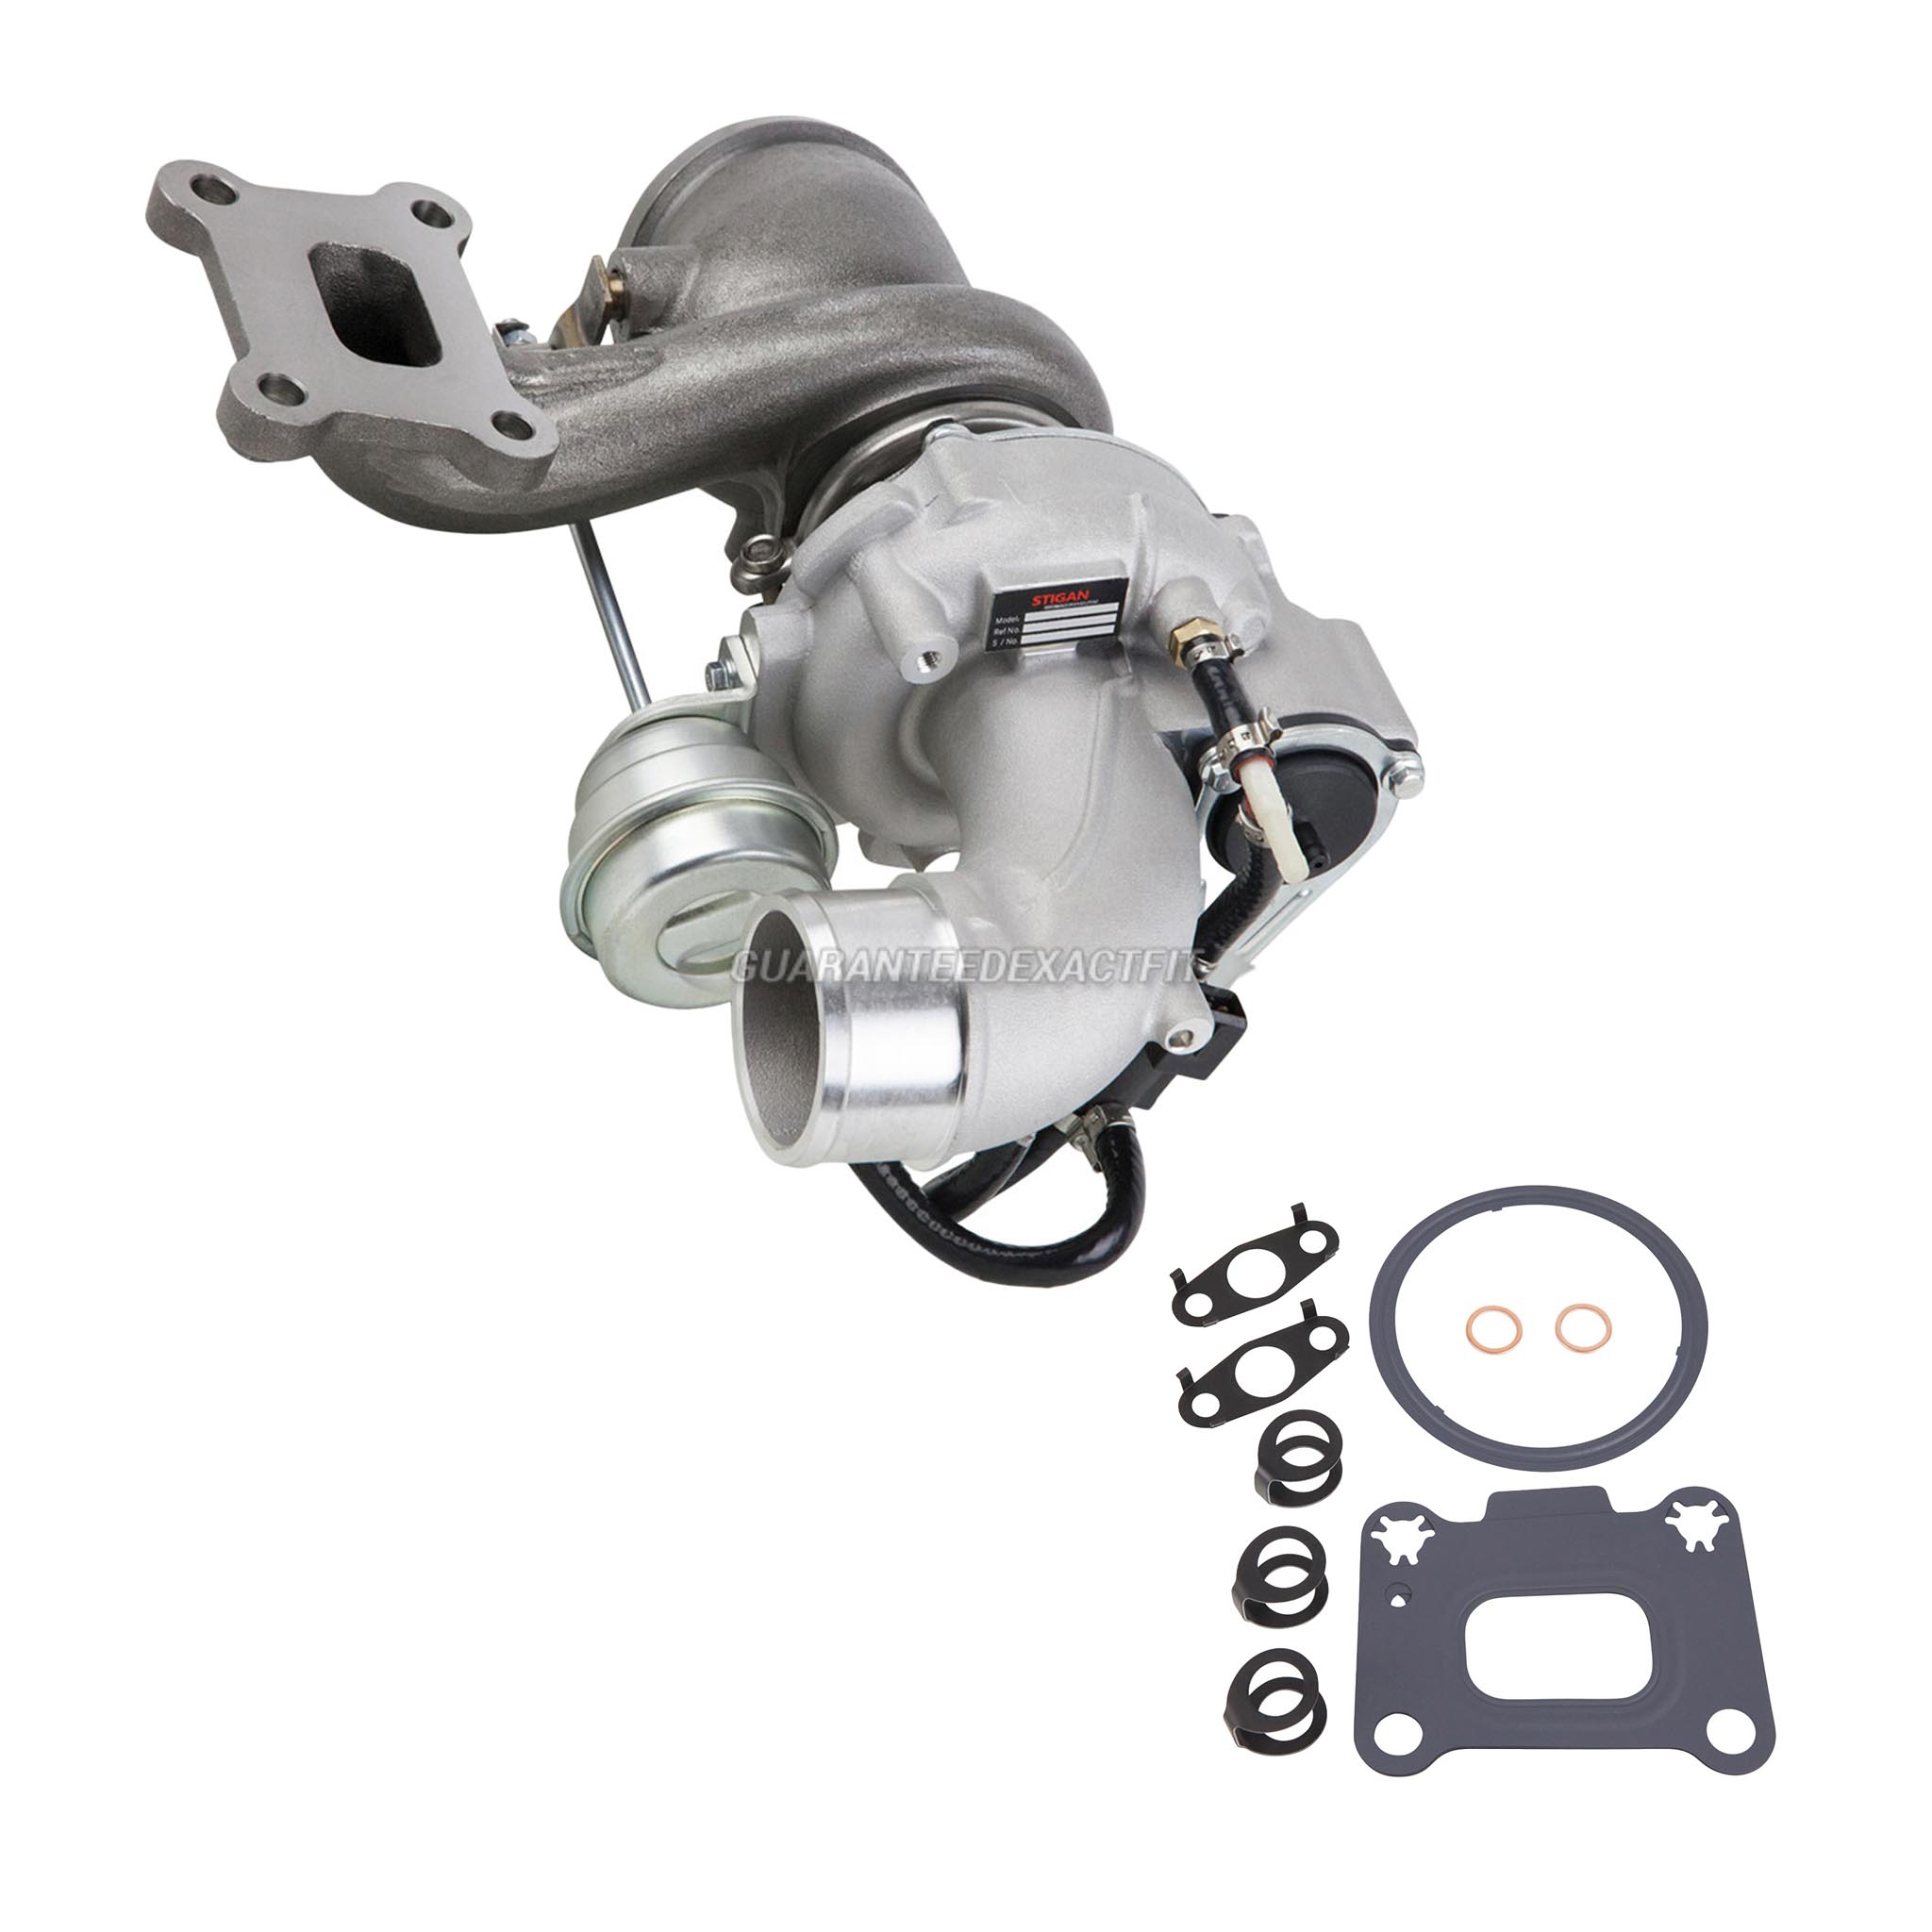 2016 Lincoln mkc turbocharger and installation accessory kit 